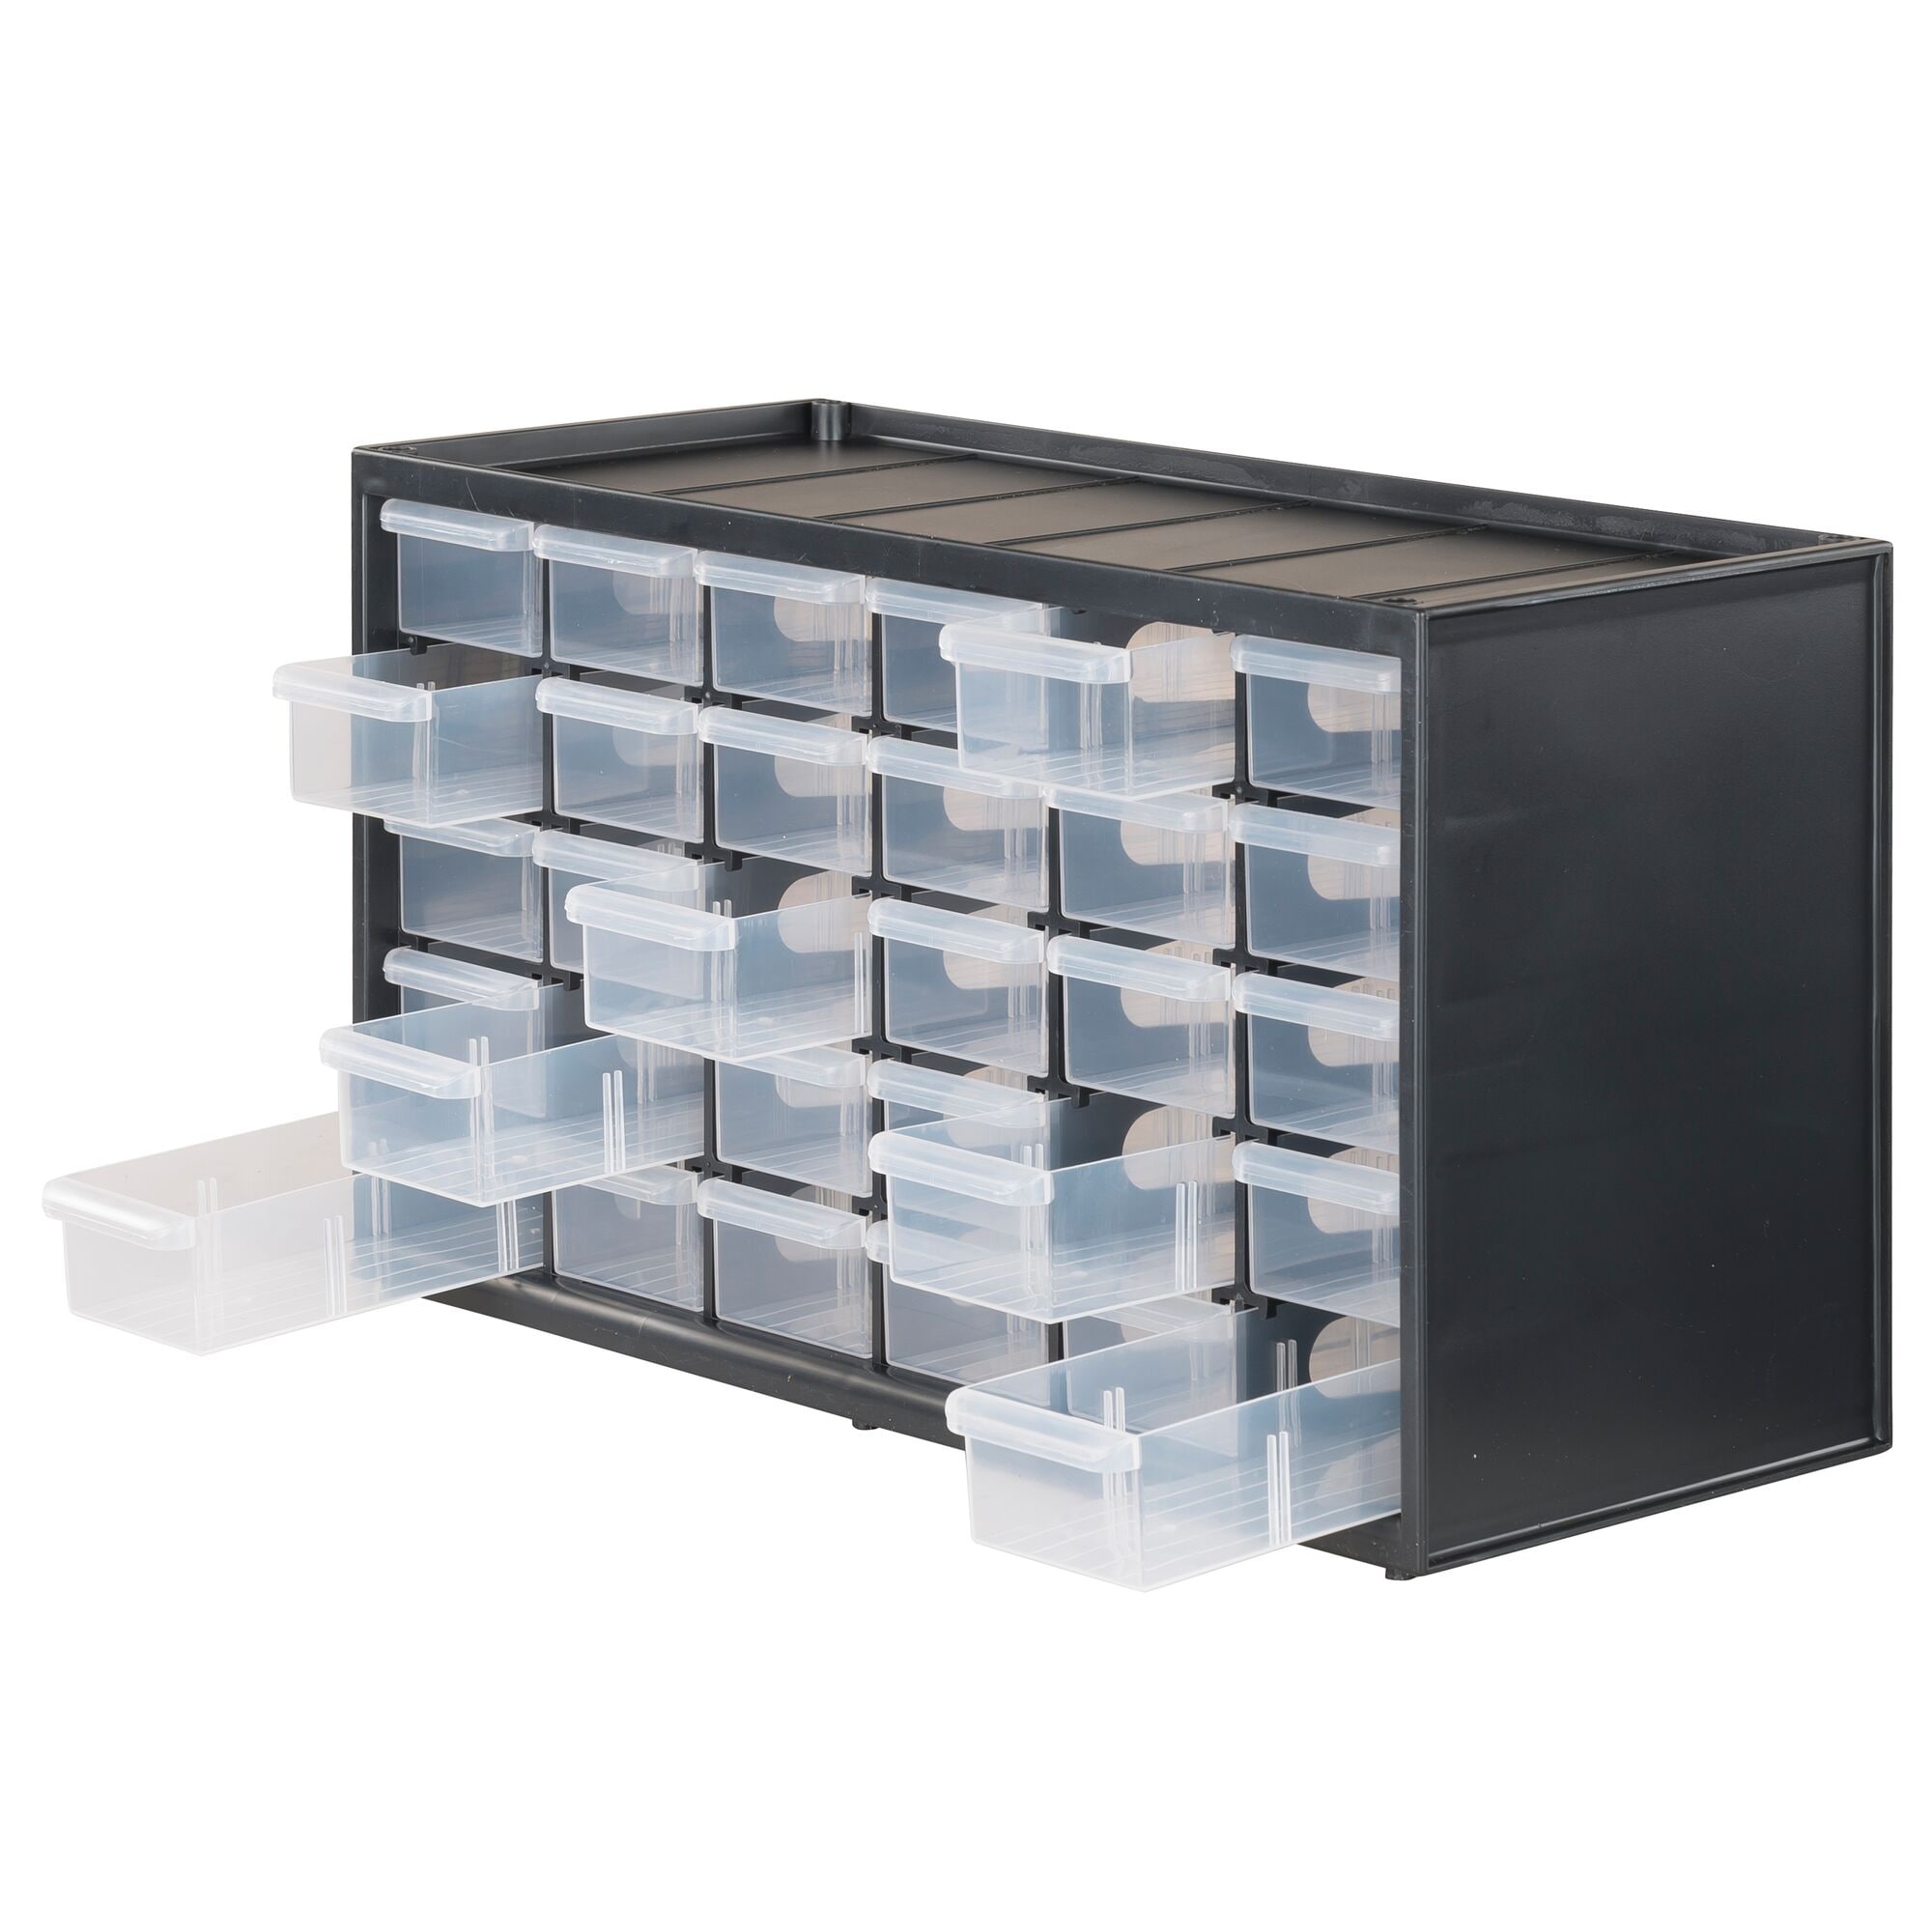 36 WIDE SMALL PARTS STORAGE & SECURITY CABINETS, Size O.D. W x D x H: 36 x  24 x 72, Bins: (96) 4 x 5 x 3, Drawers: Bins - (112) 12